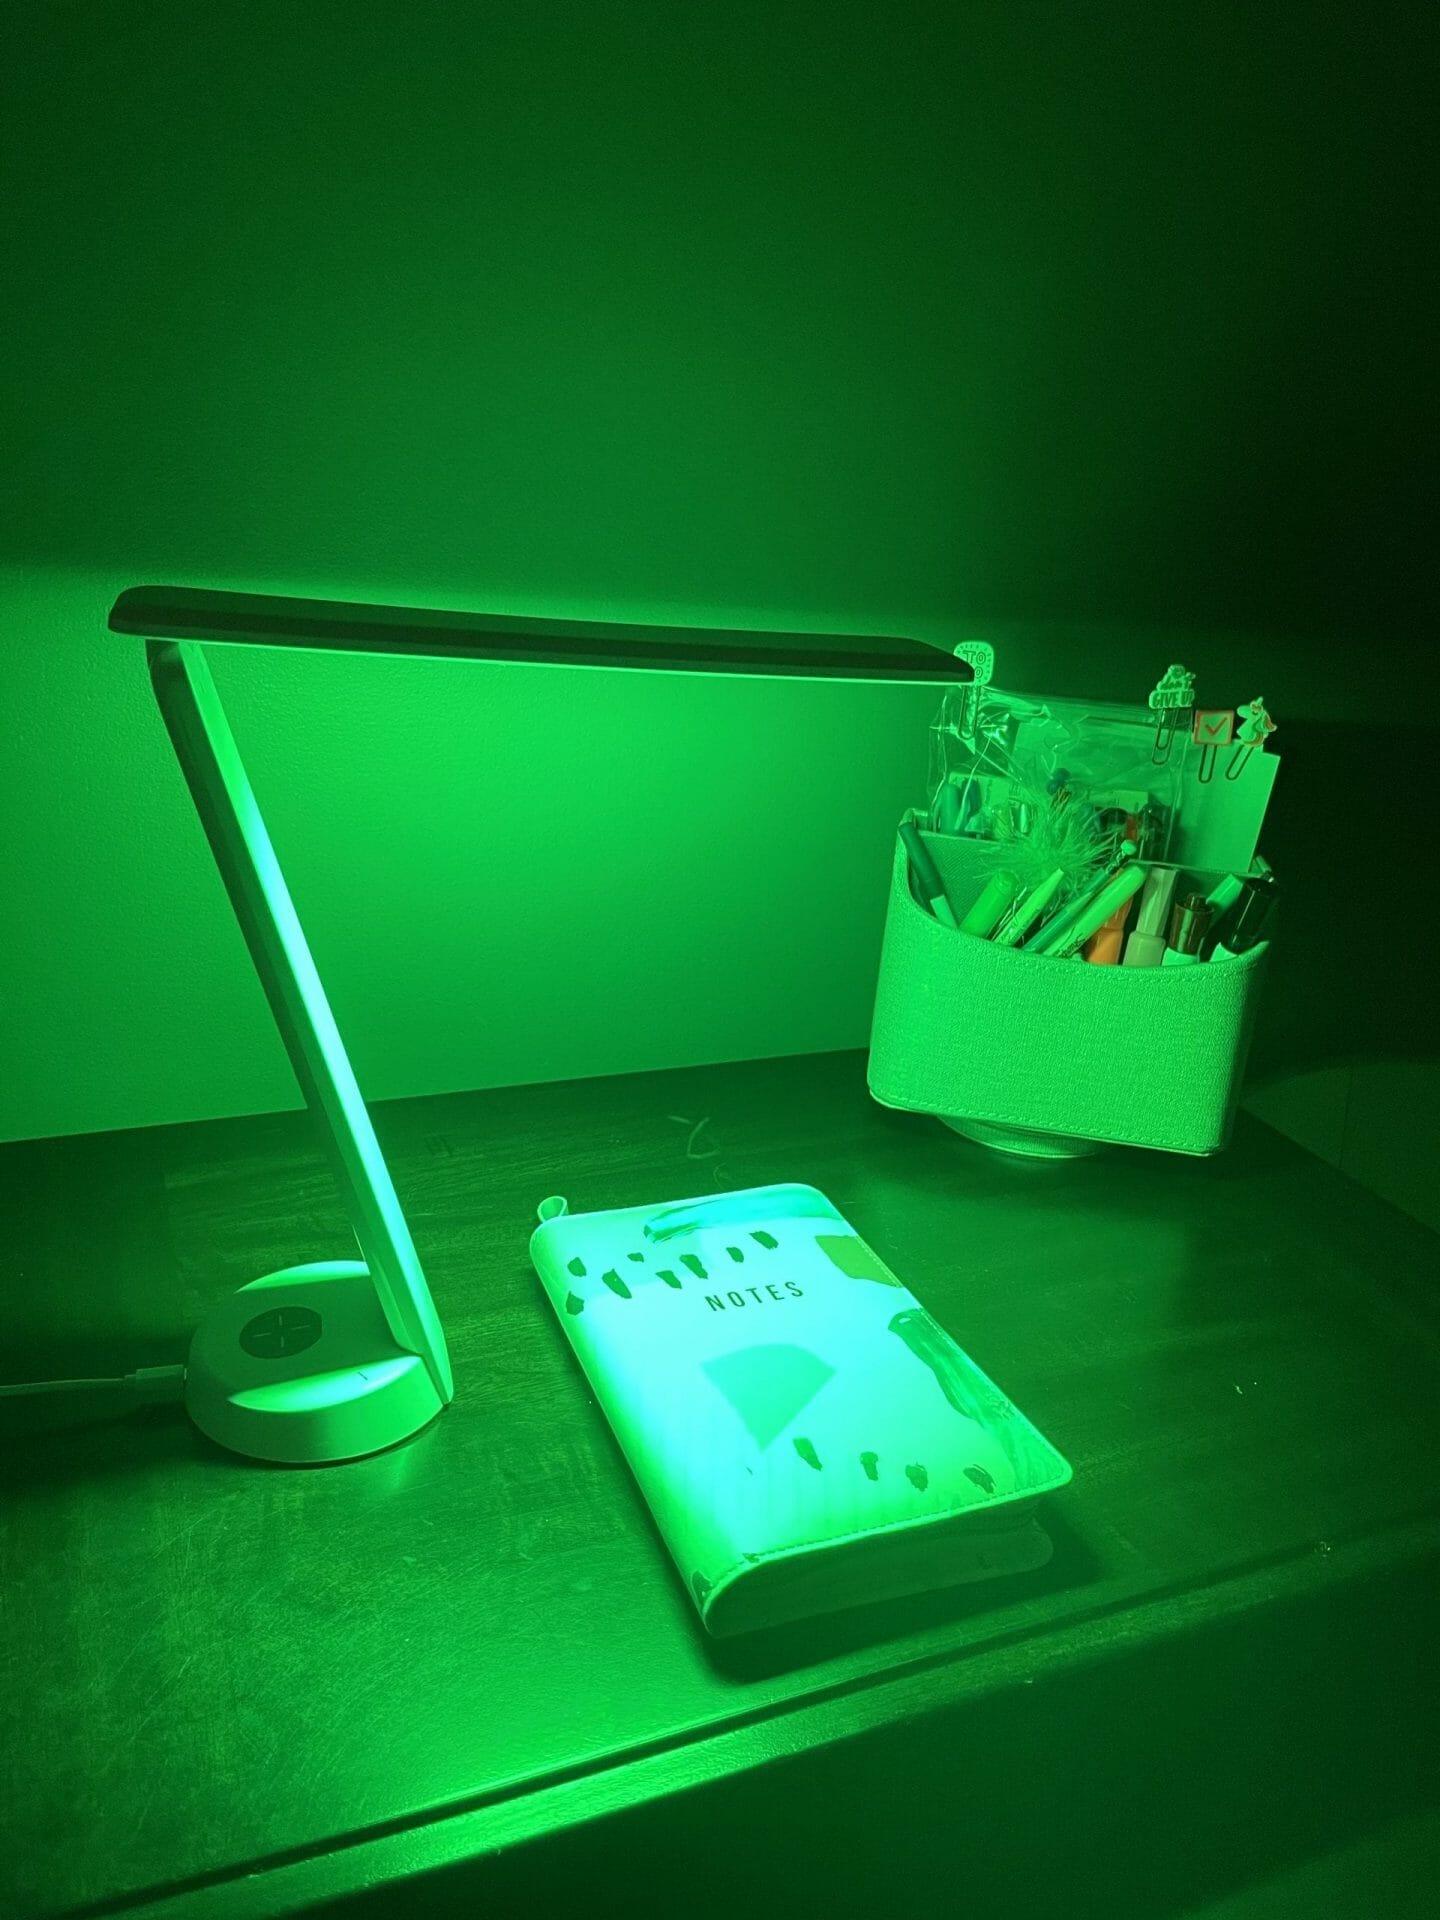 green light therapy for migraine